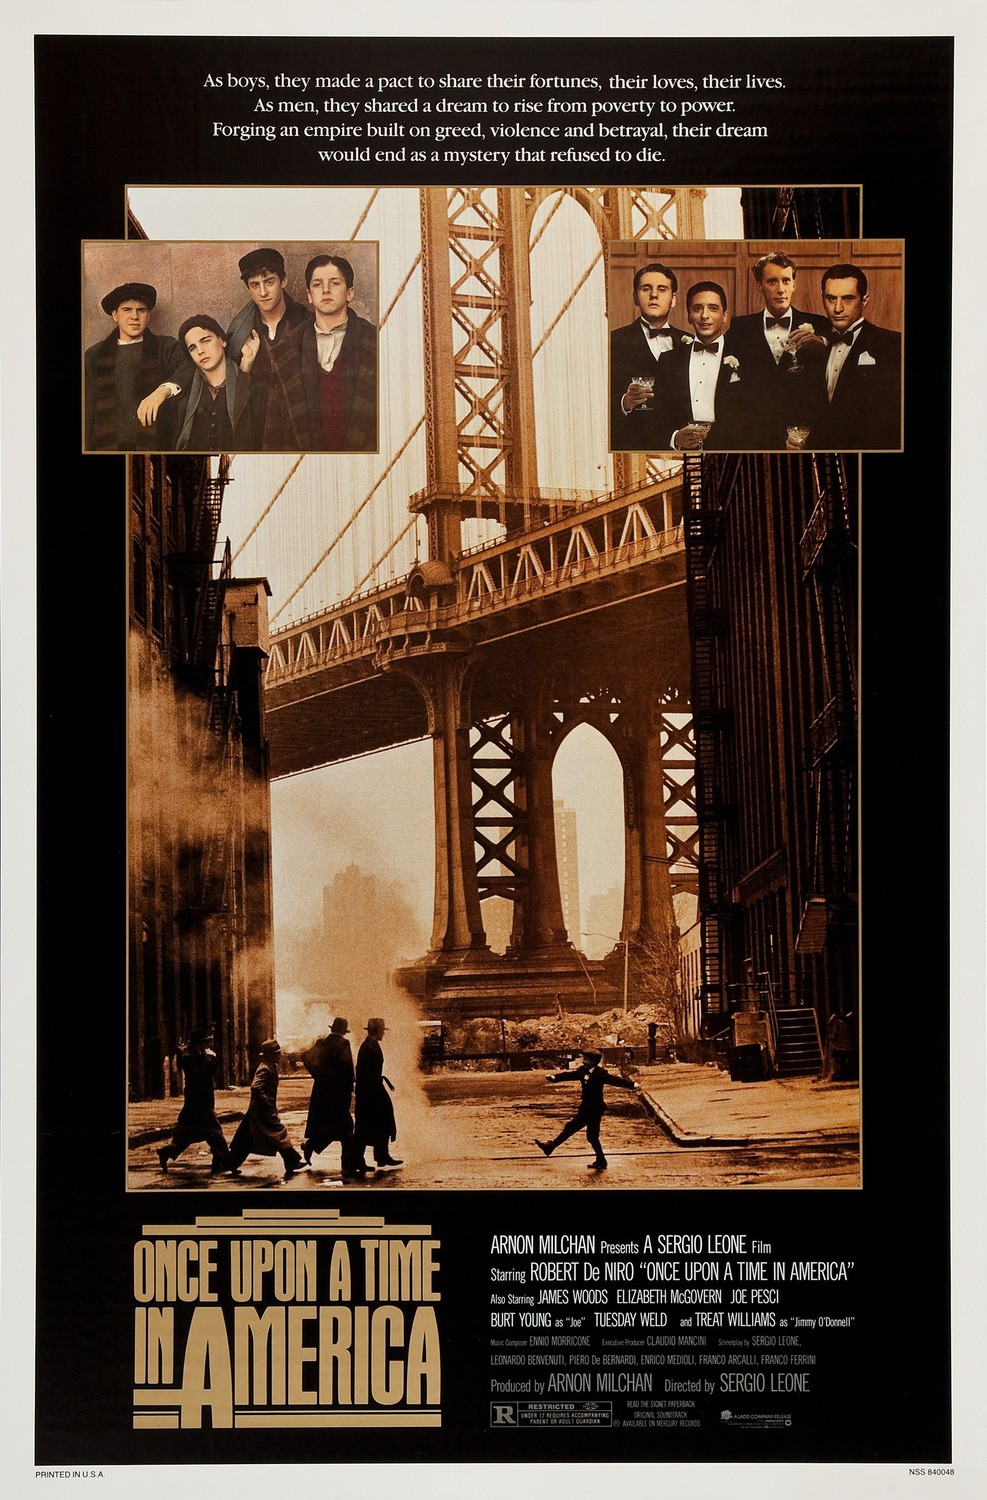 Sergio Leone's 'ONCE UPON A TIME IN AMERICA' (Extended Version)